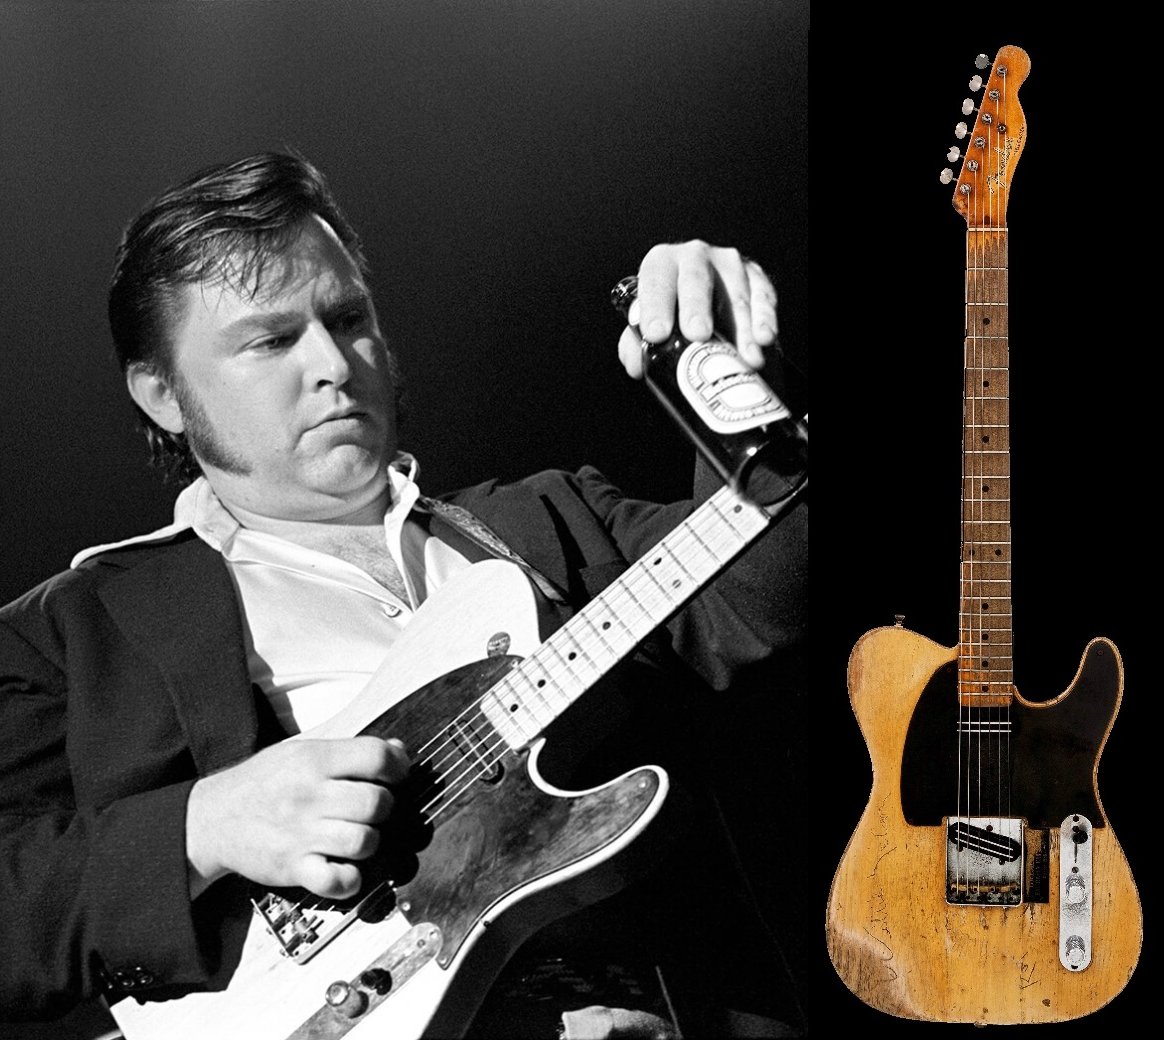 #DannyGatton Today, Danny Gatton, one of the greatest guitarists of all time, would have turned 78 years old - Danny Gatton's 1953 Fender Telecaster #guitar #Fender #Telecaster #FamousGuitars #HappyHeavenlyBirthdayDannyGatton